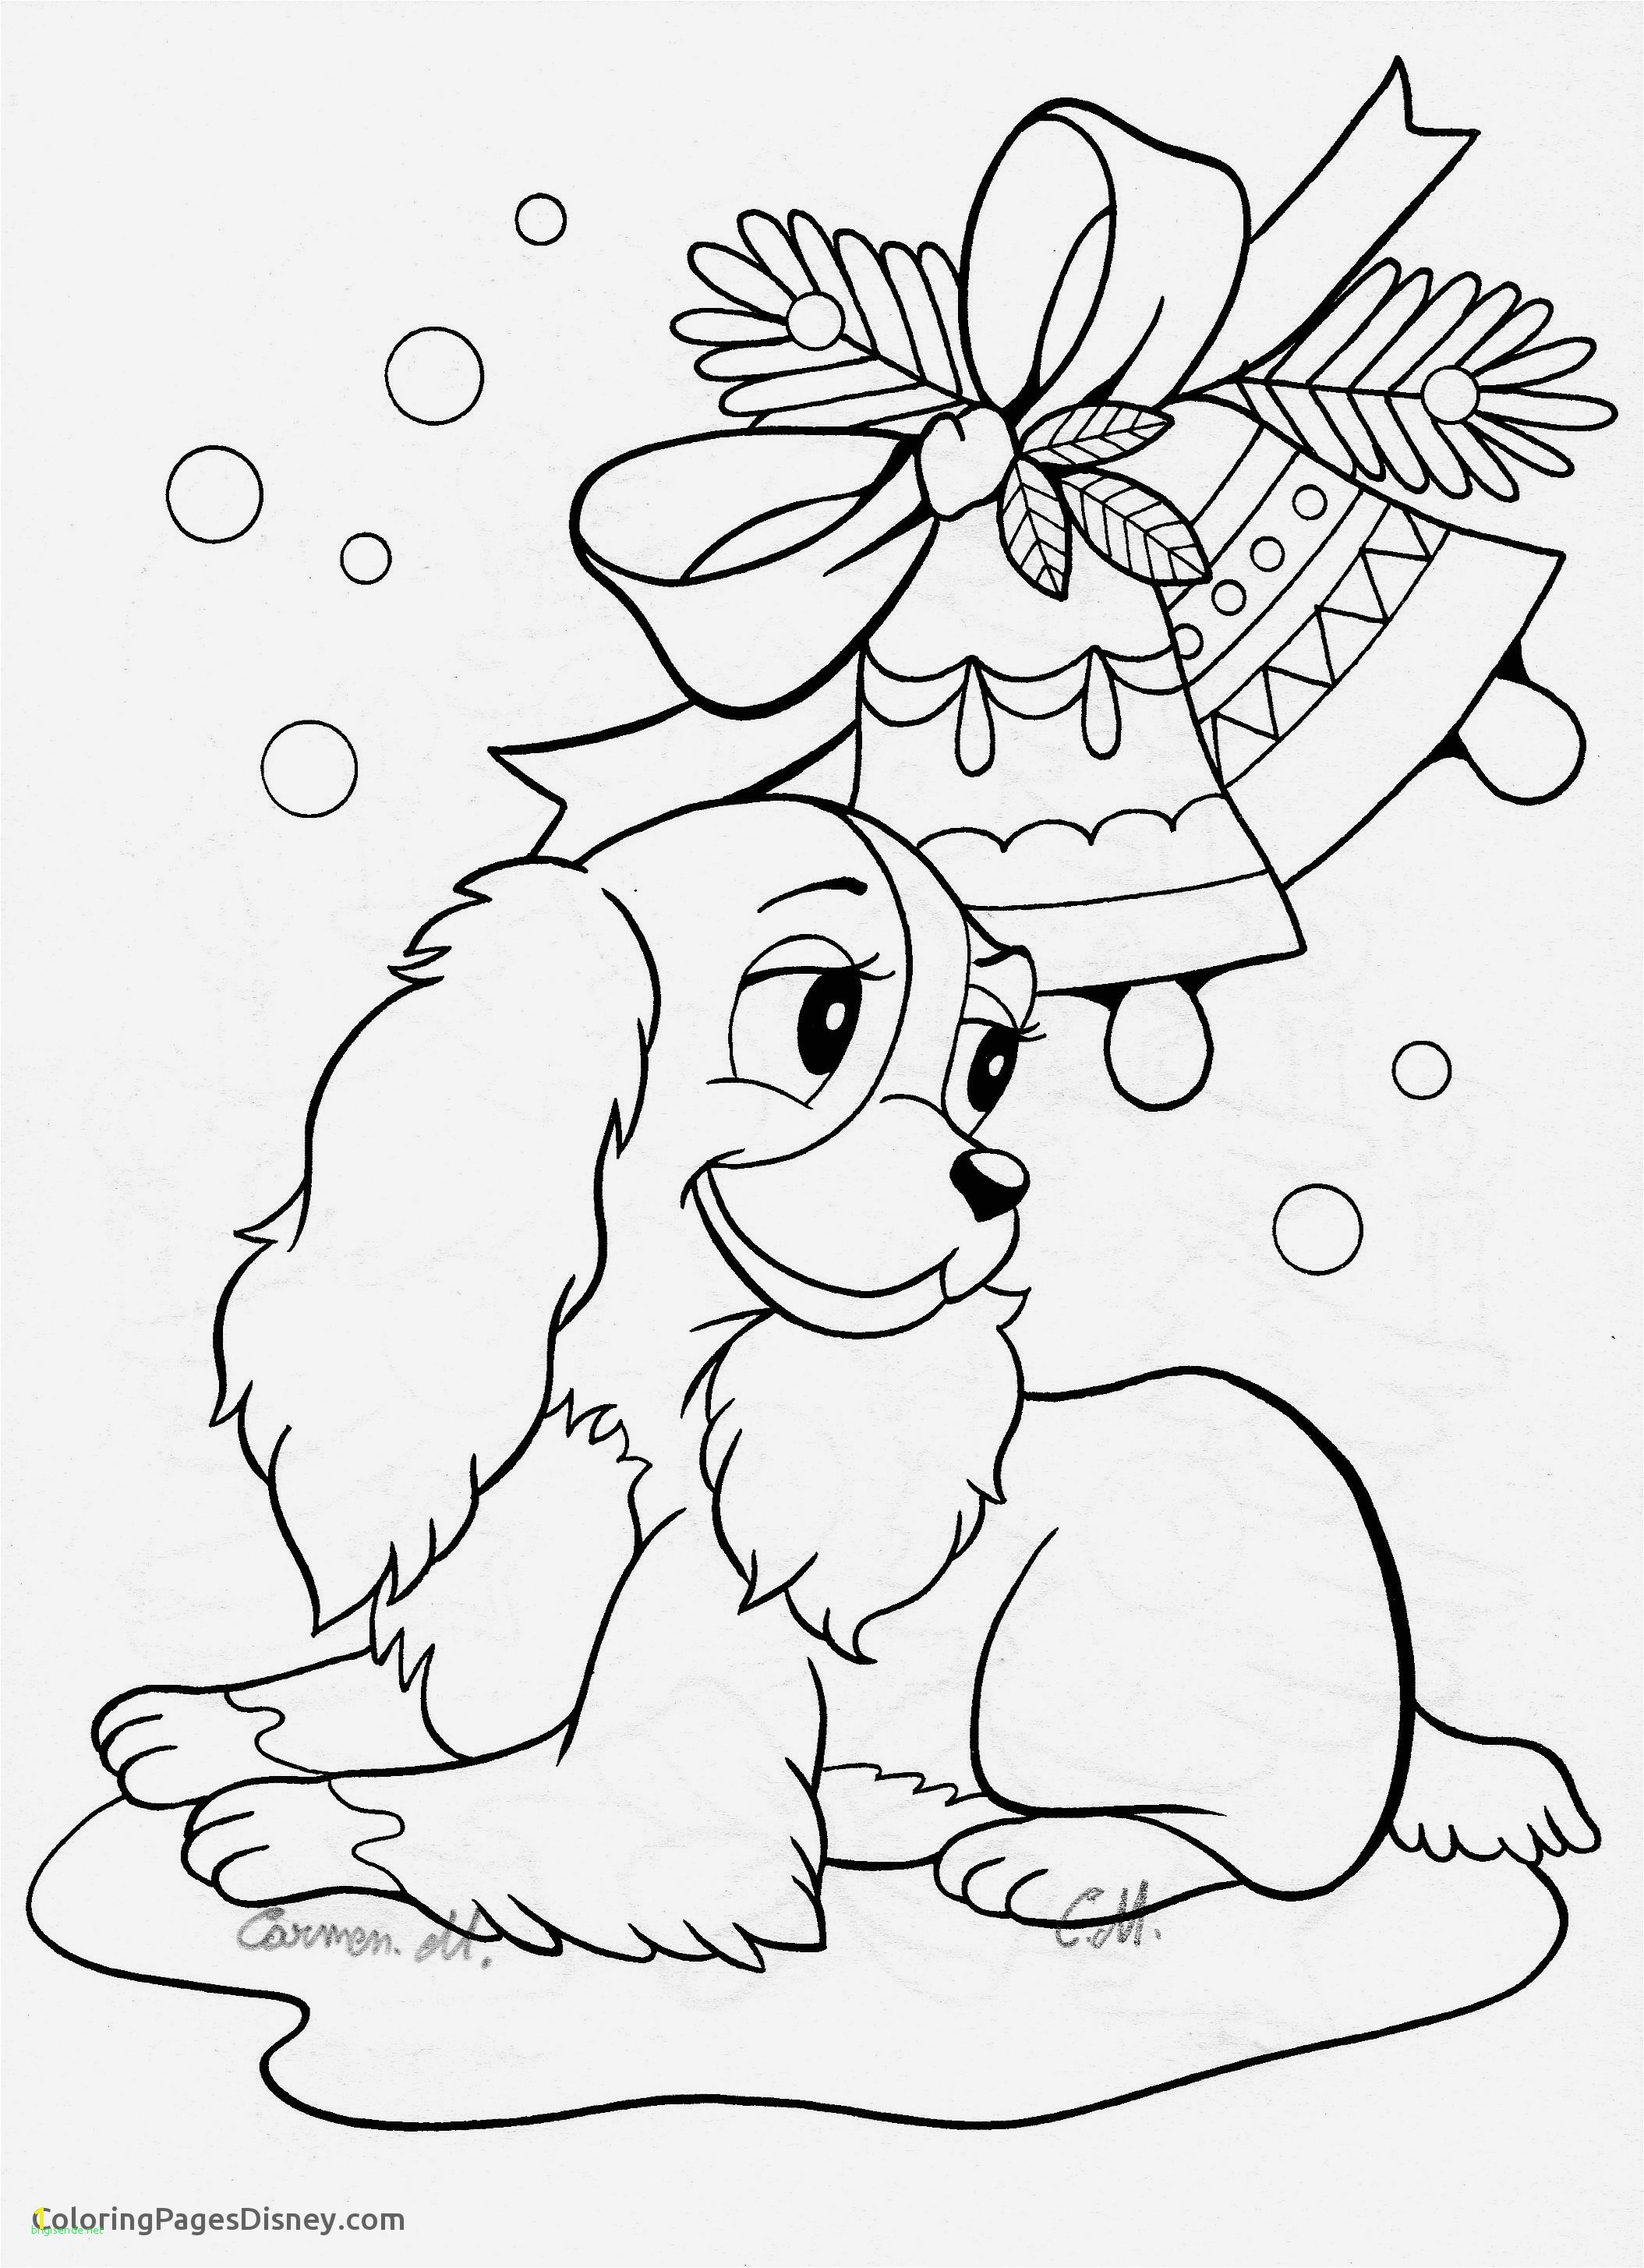 Free Coloring Pages Disney Printables Awesome Letter Y Coloring Pages Elegant Printable Od Dog Coloring Pages